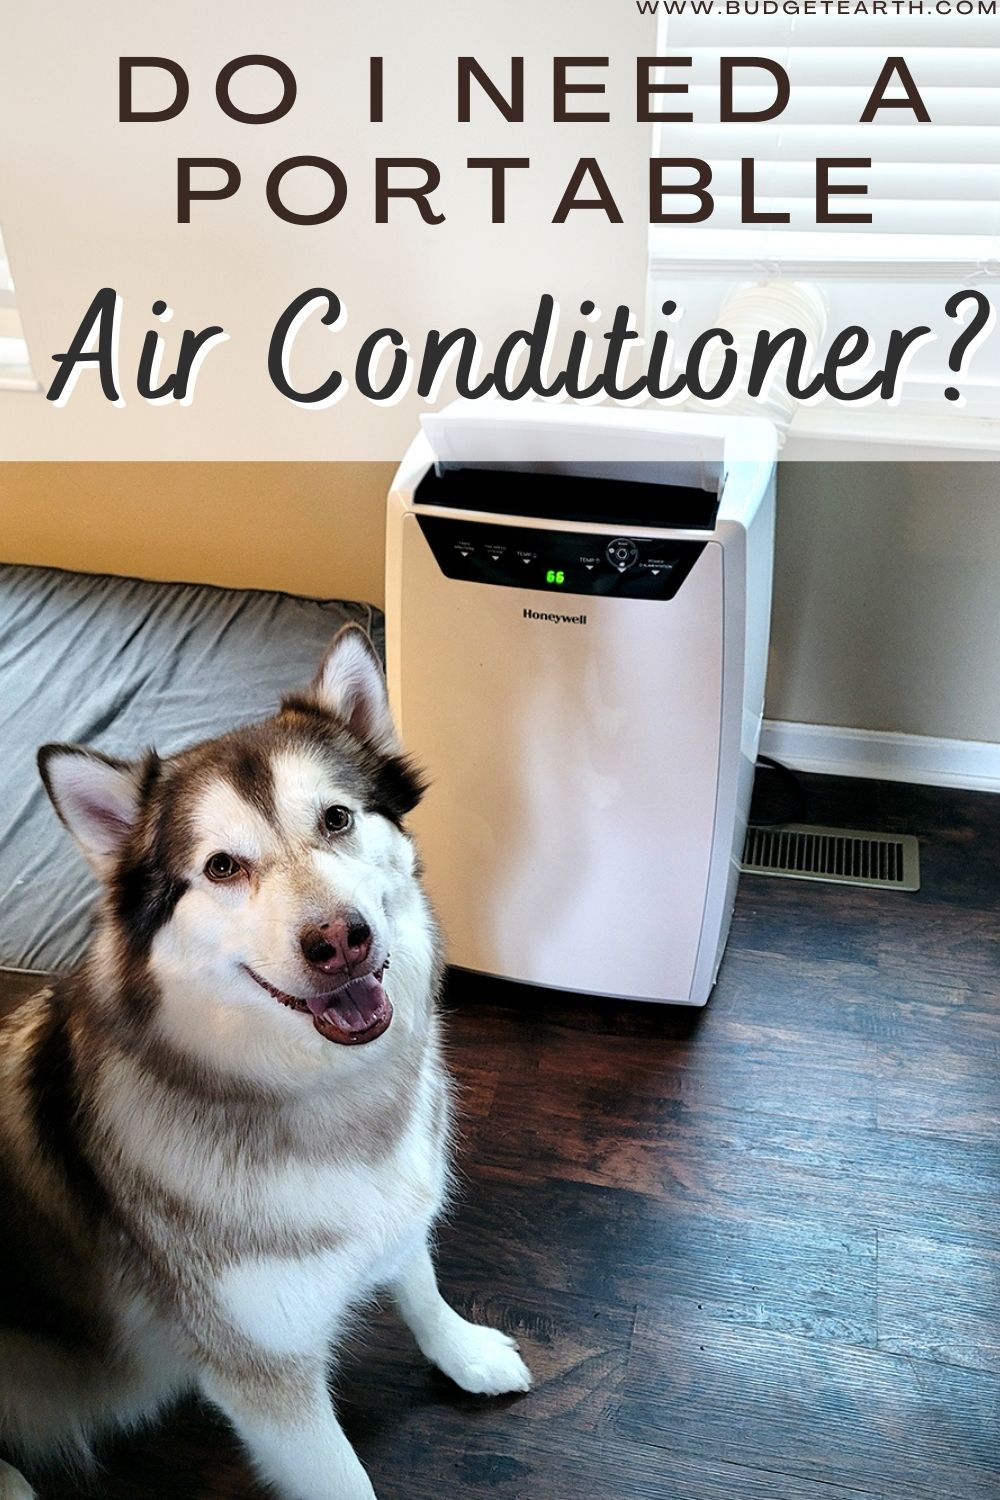 Rylie the Alaskan Malamute sitting next to a Honeywell Portable Air Conditioner